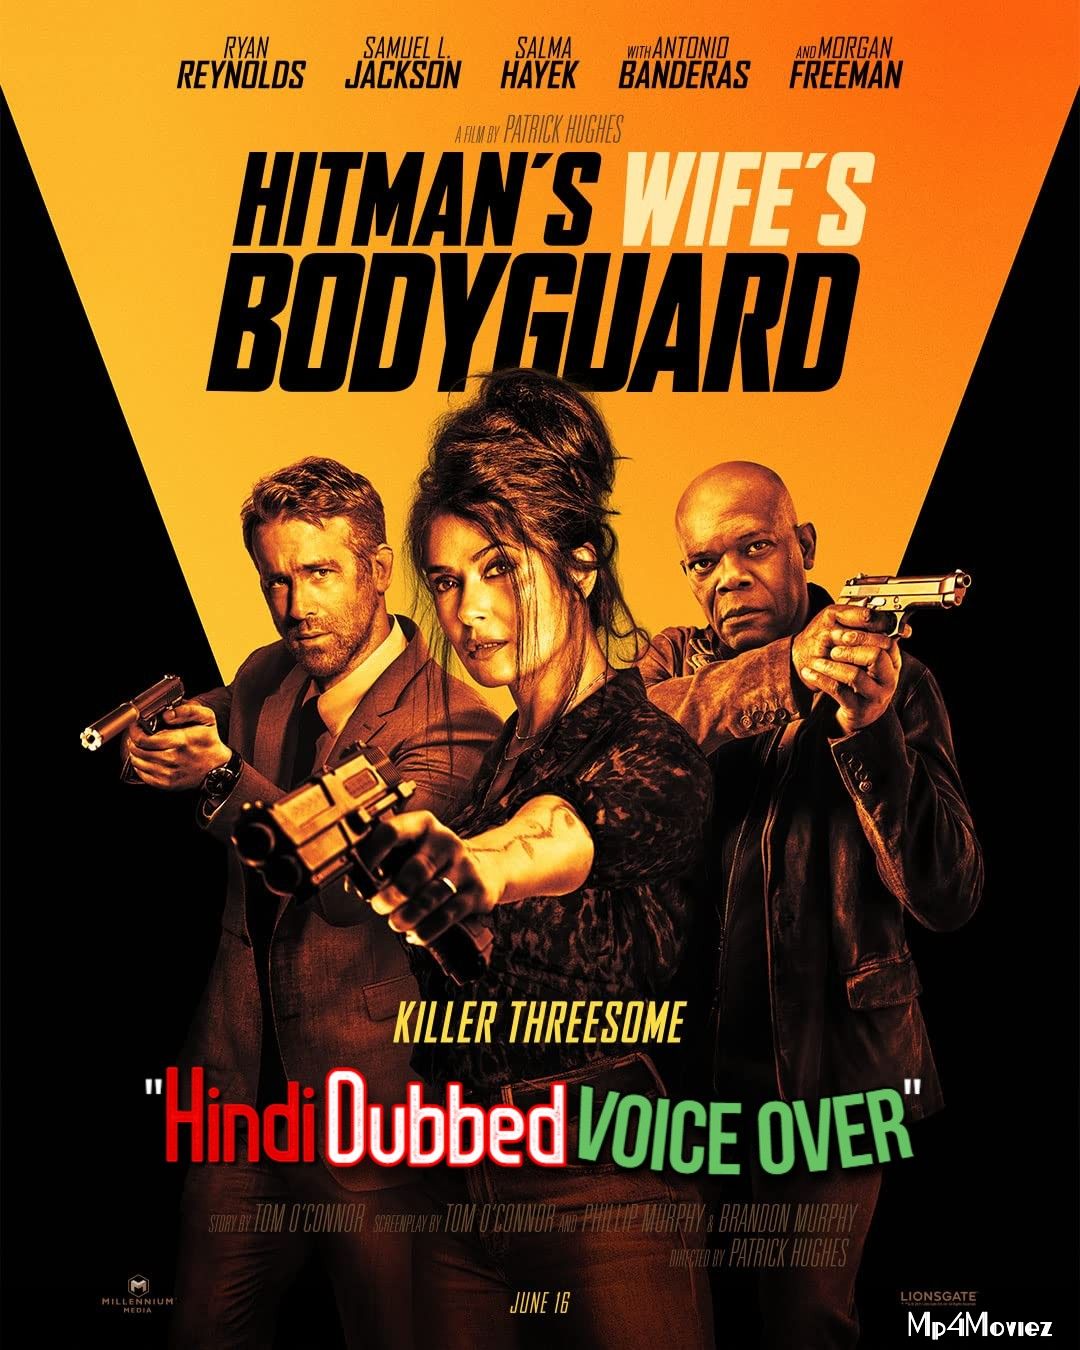 The Hitmans Wifes Bodyguard (2021) Hindi (Voice Over) Dubbed WEBRip download full movie